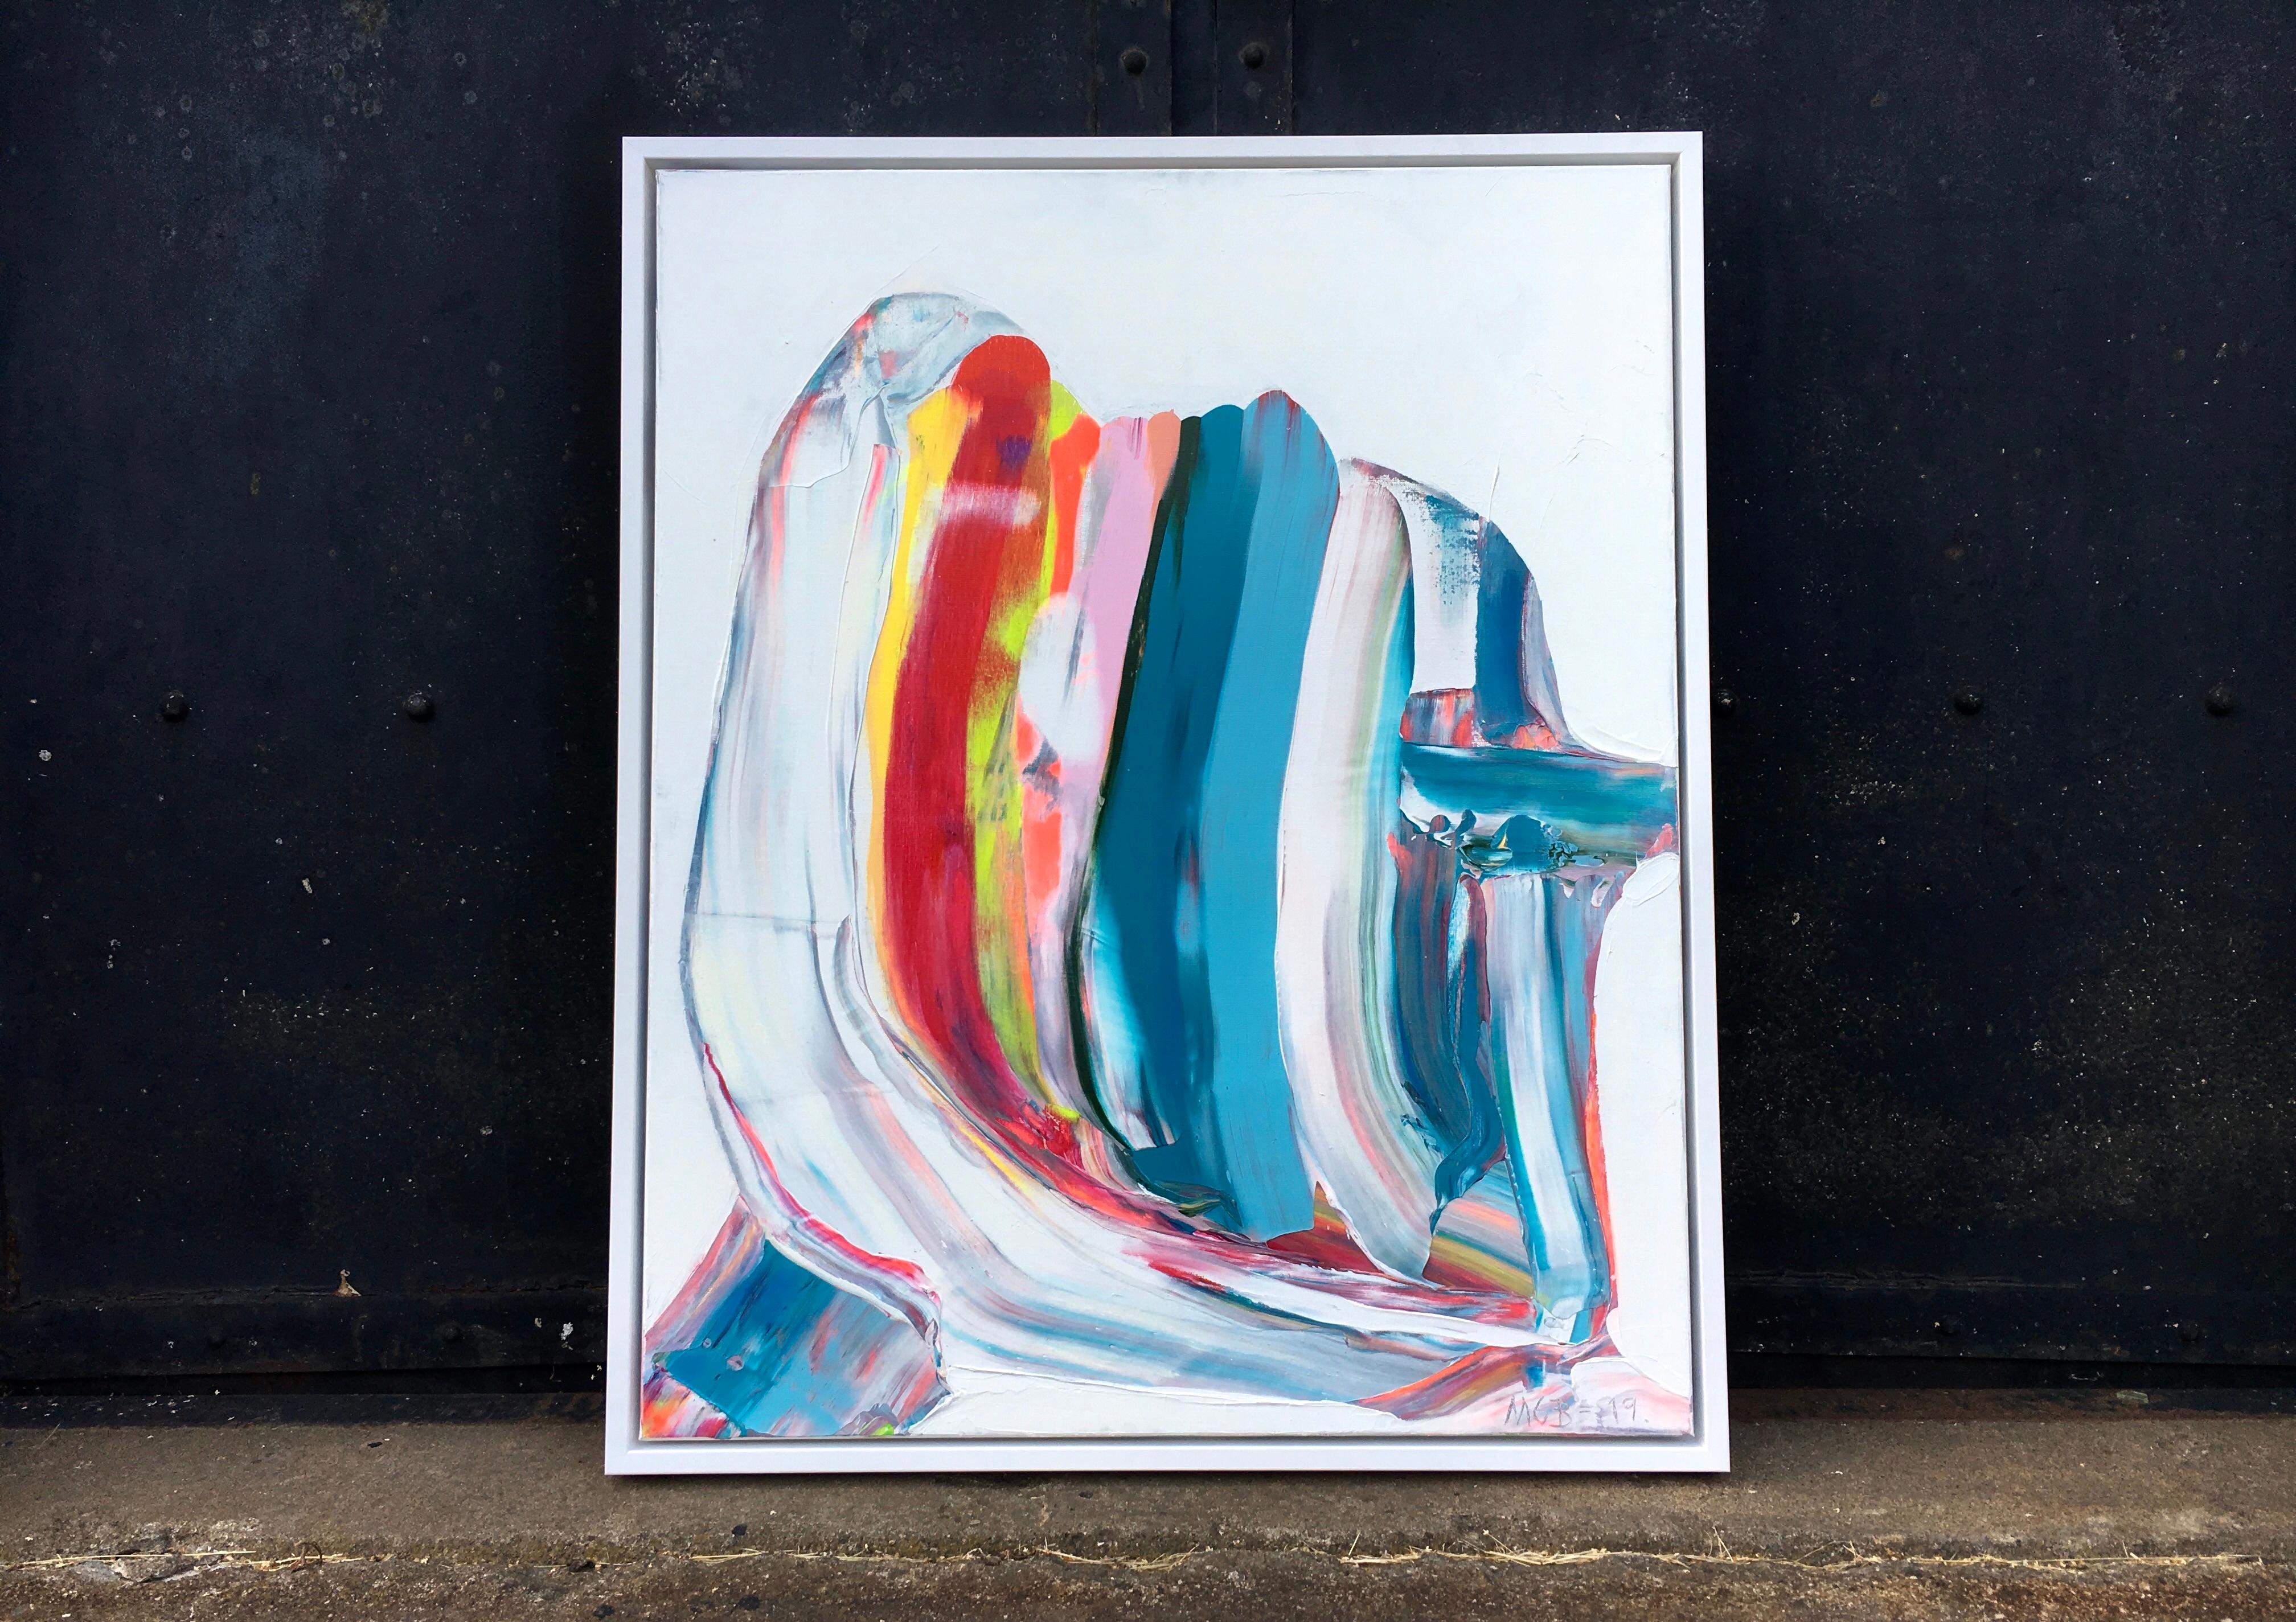 'Nordic Signals' by Contemporary abstract colorist, Marit Geraldine Bostad, 2019. Acrylic on canvas, 41 x 33 in.   This painting was shortlisted for the Prestigious Ashhurst Emerging Artist Prize for 2020, and was exhibited in London at the Ashurst